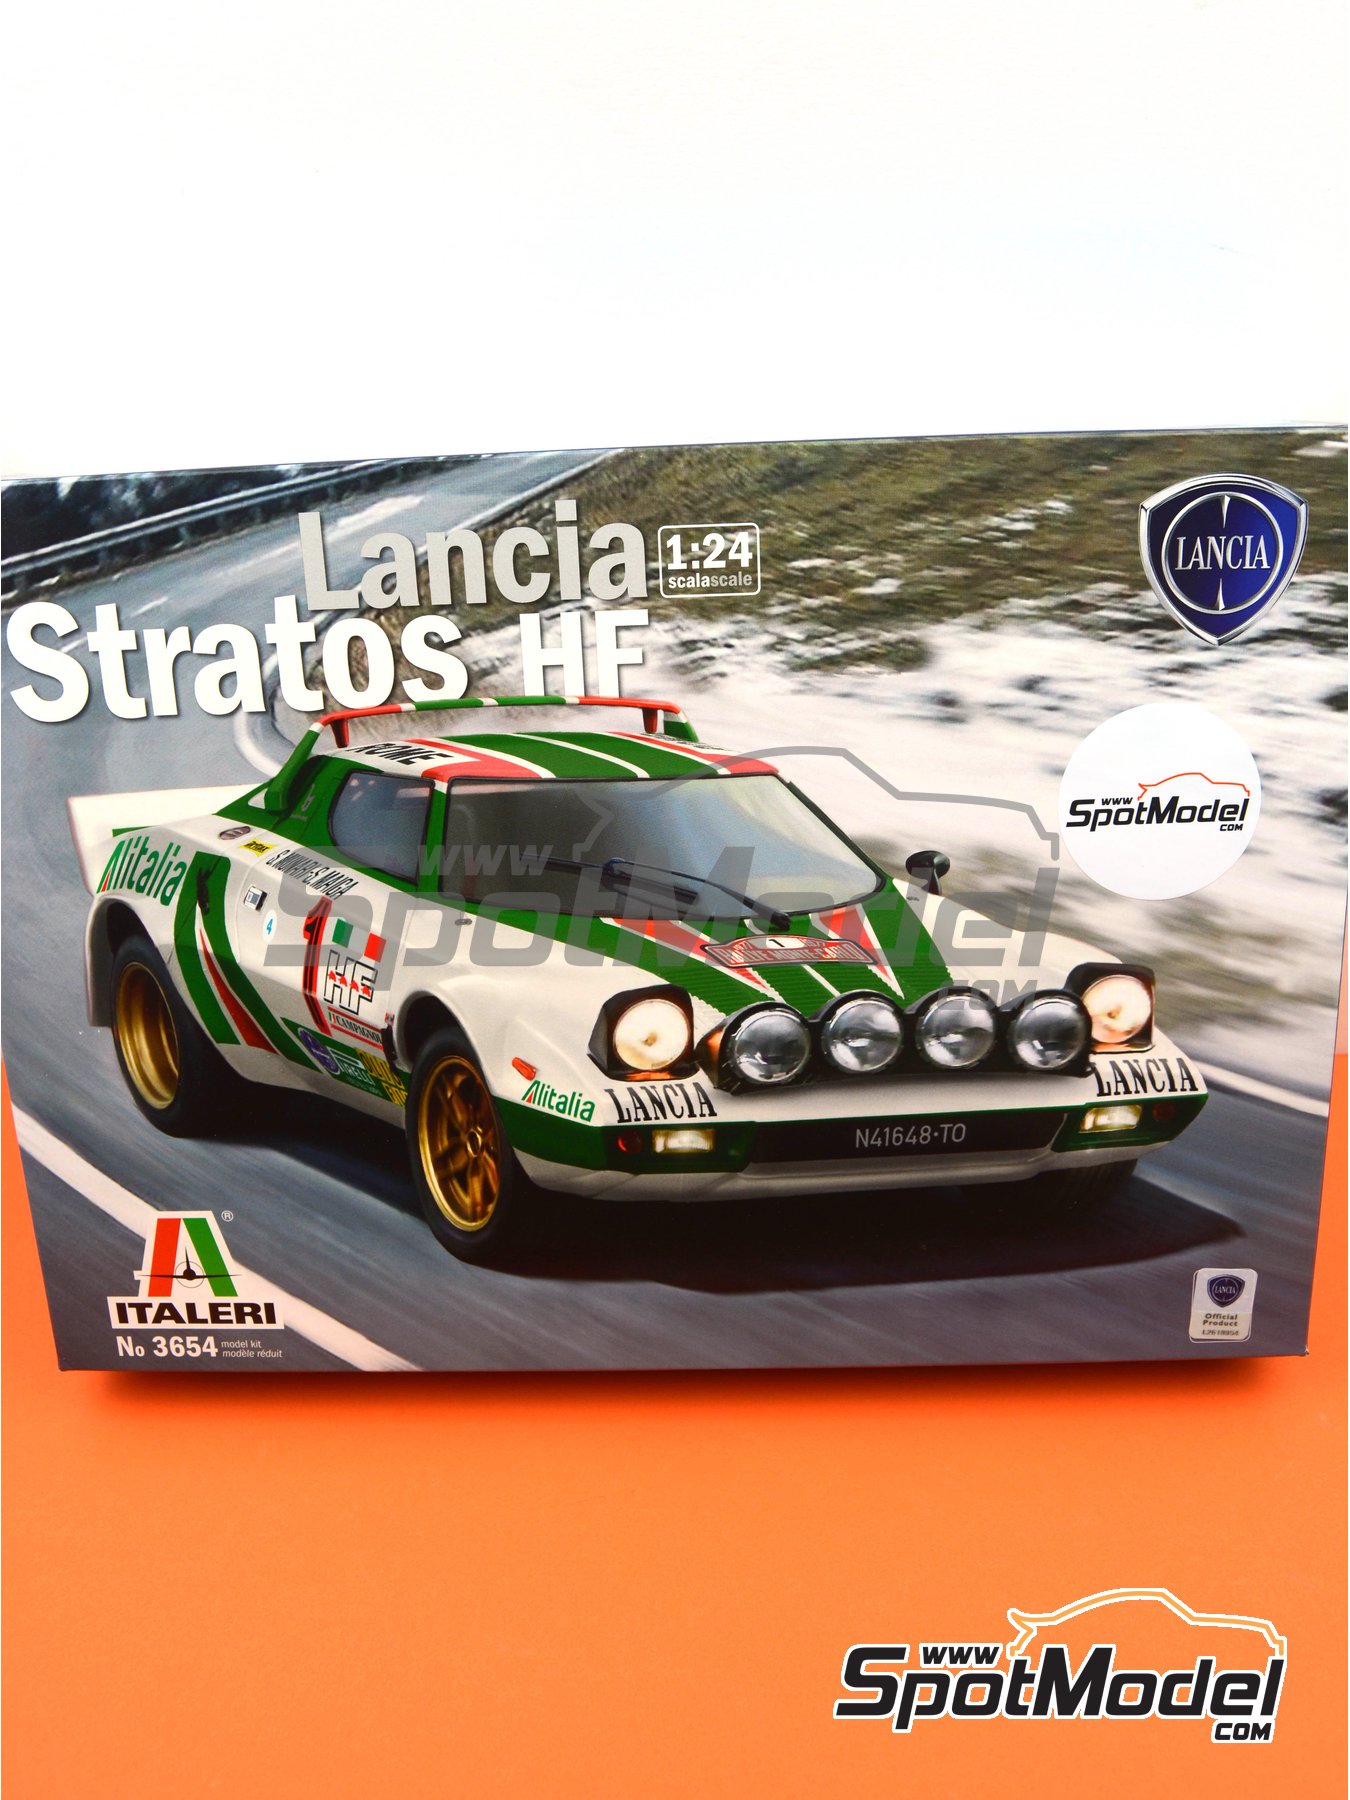 Lancia Stratos HF sponsored by Alitalia - Monte Carlo Rally - Rallye  Automobile de Monte-Carlo 1977. Model car kit in 1/24 scale manufactured by  